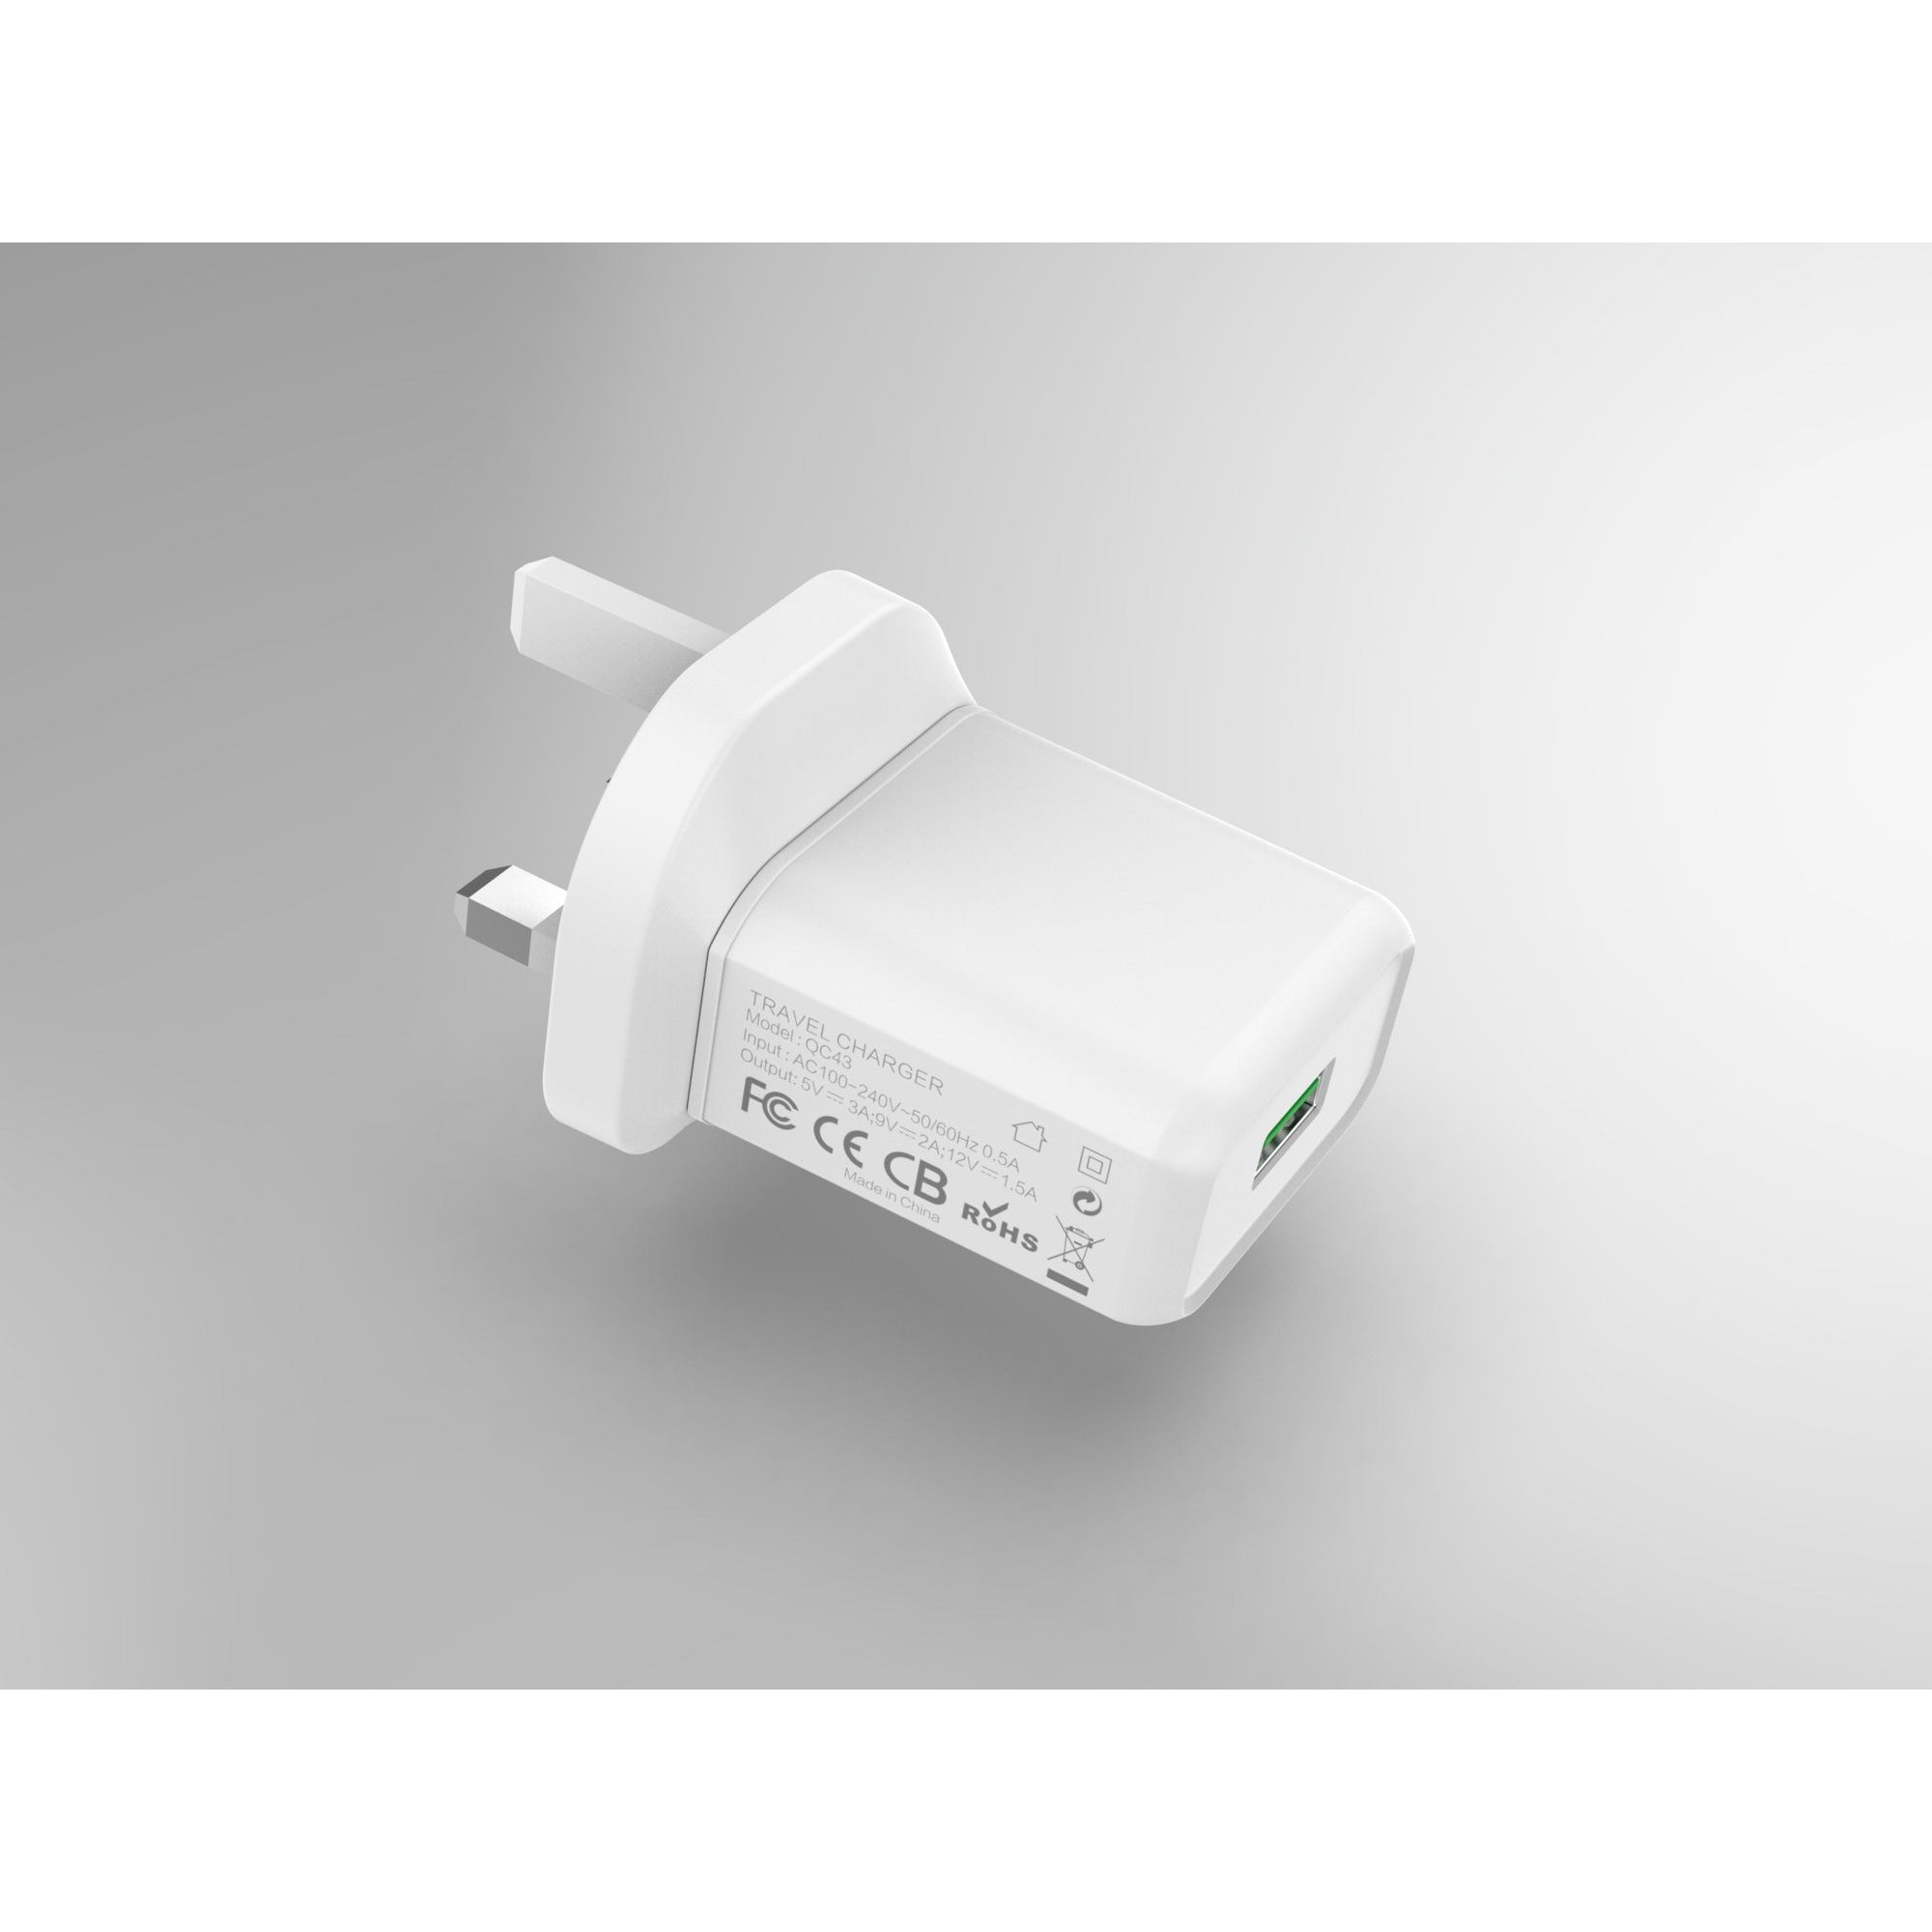 3.0 USB Plug CE Certified Charger Adaptor